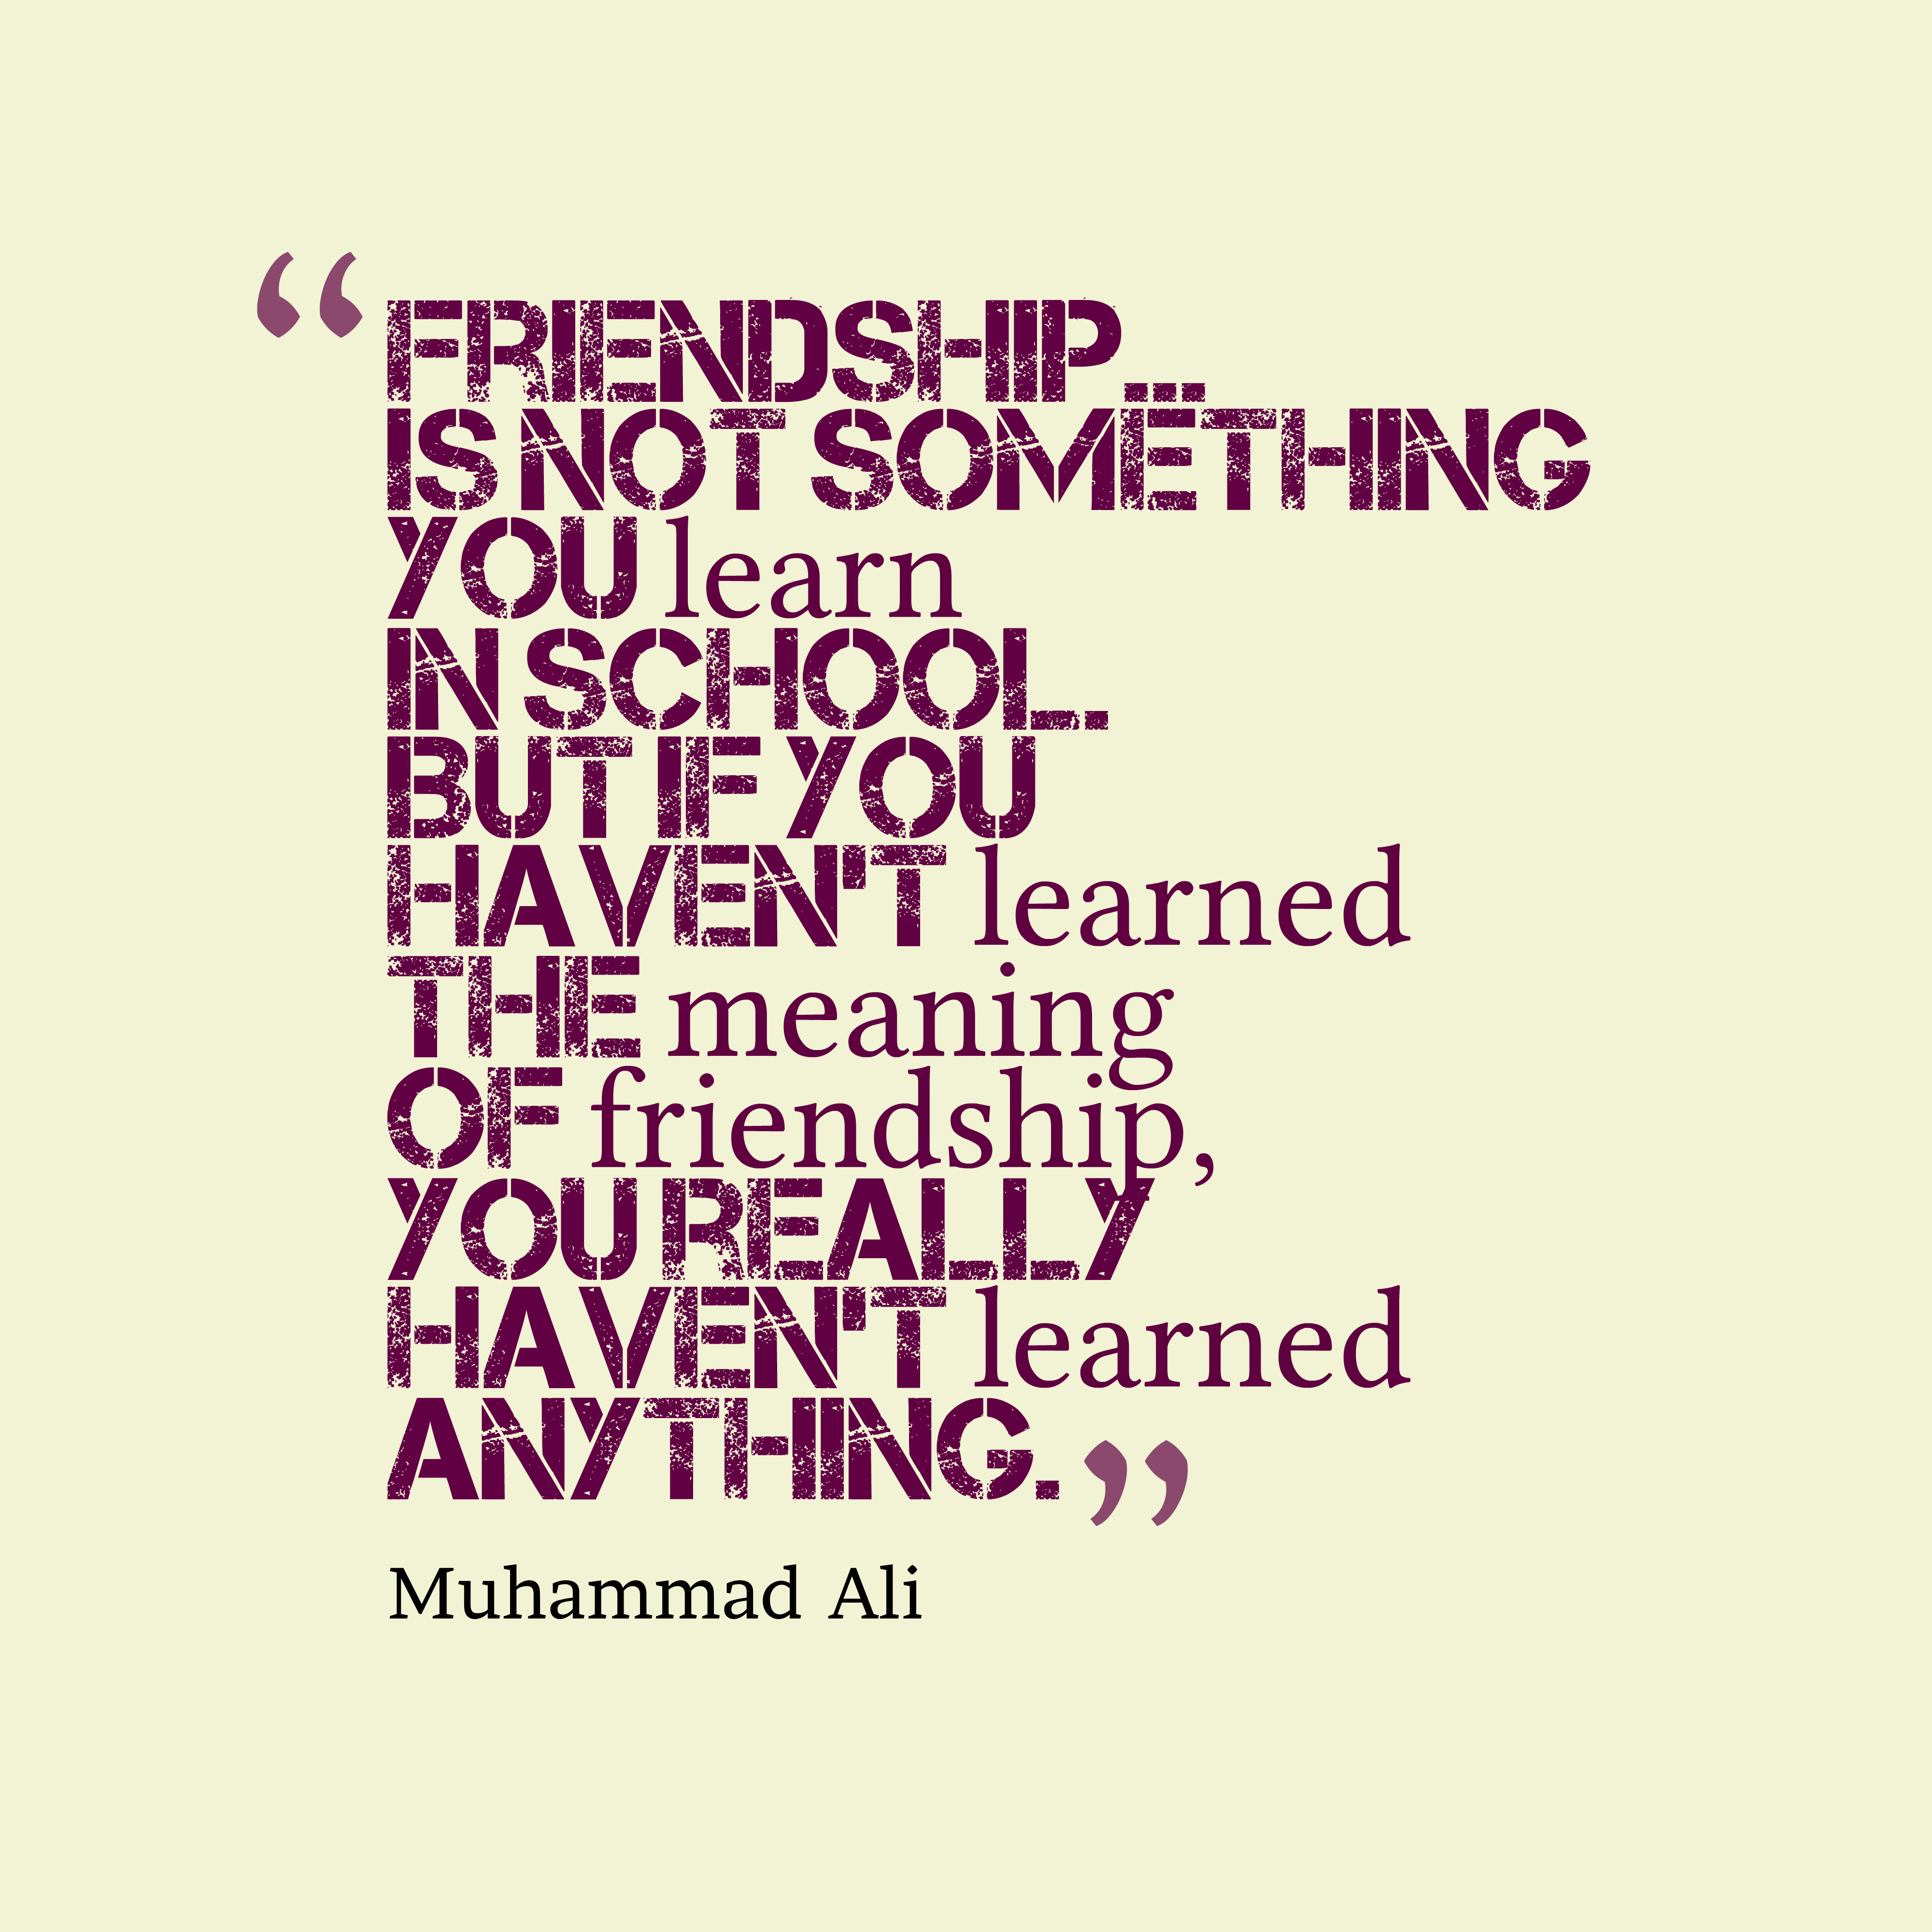 Beautiful Friendship Quotes
 The 20 Most Beautiful Friendship Quotes